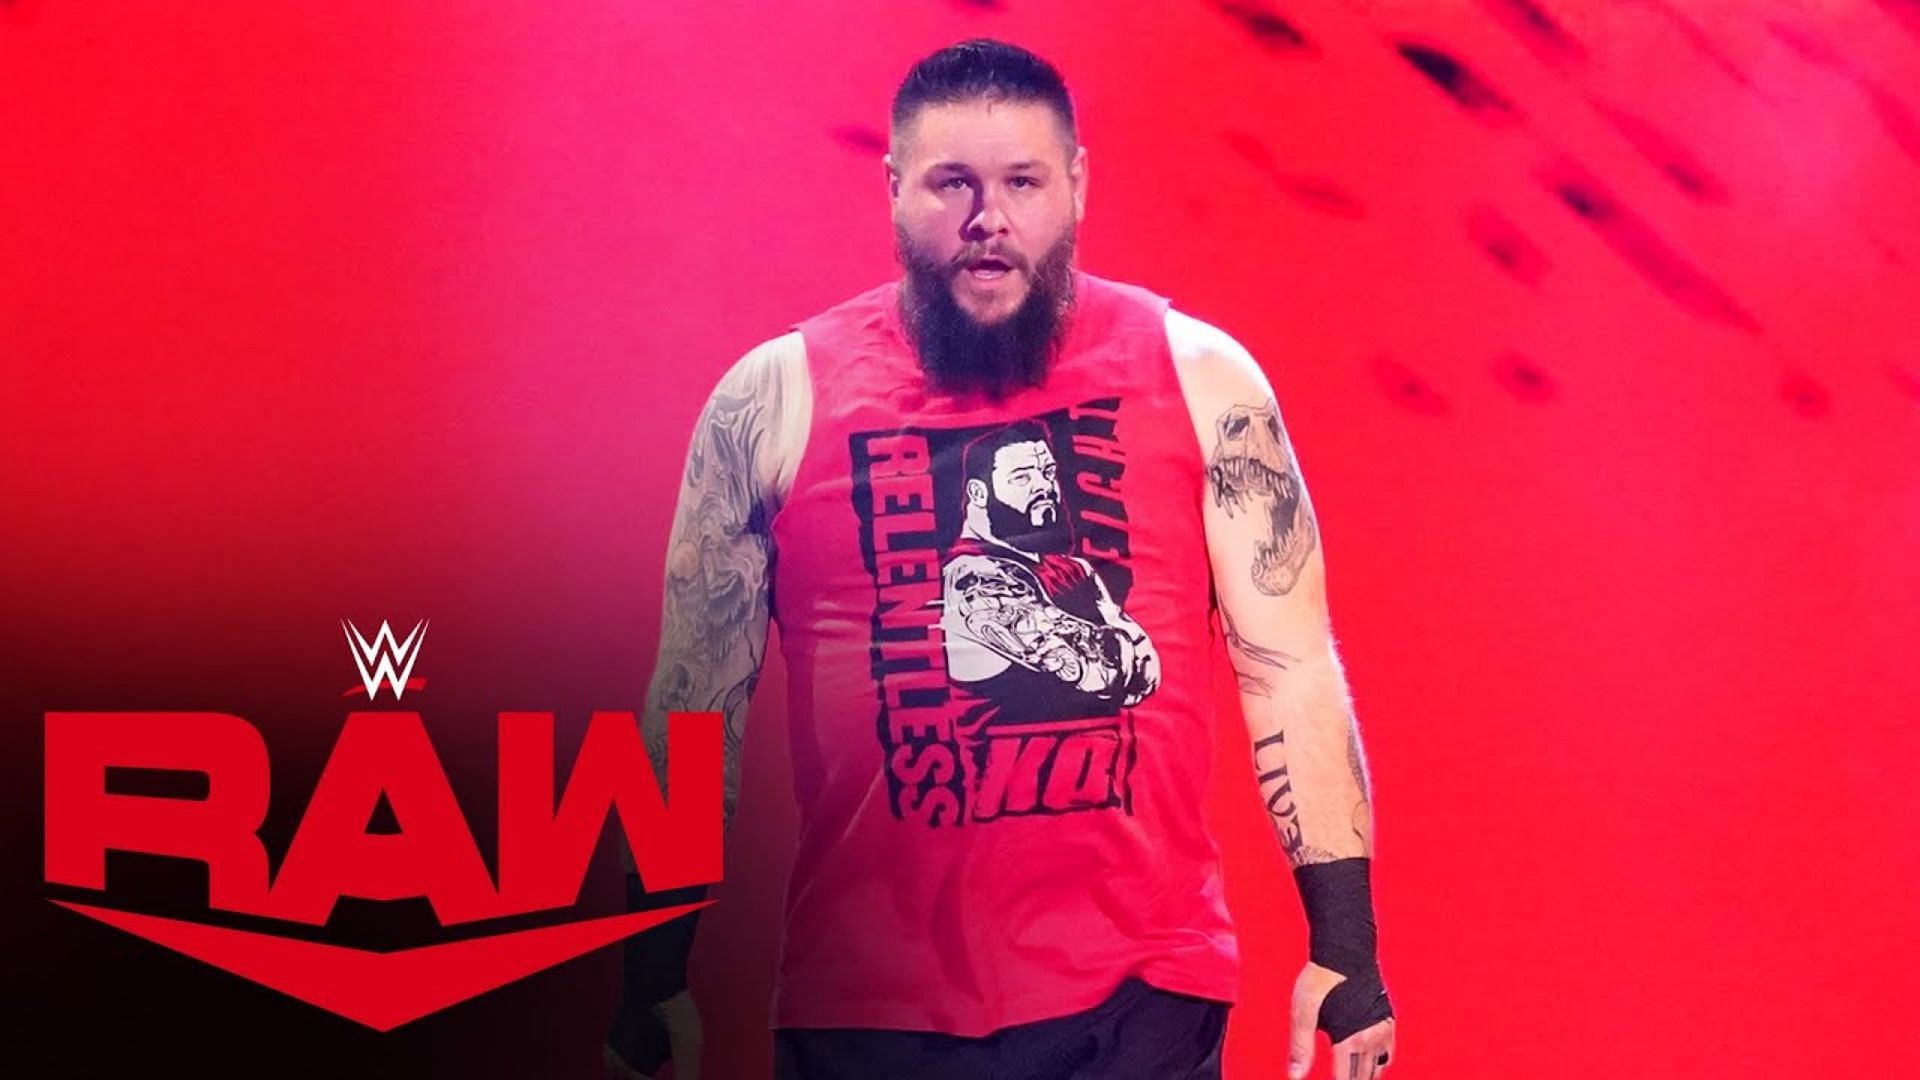 Kevin Owens is set to face either Ezekiel, Elias, or Elrod on RAW tonight